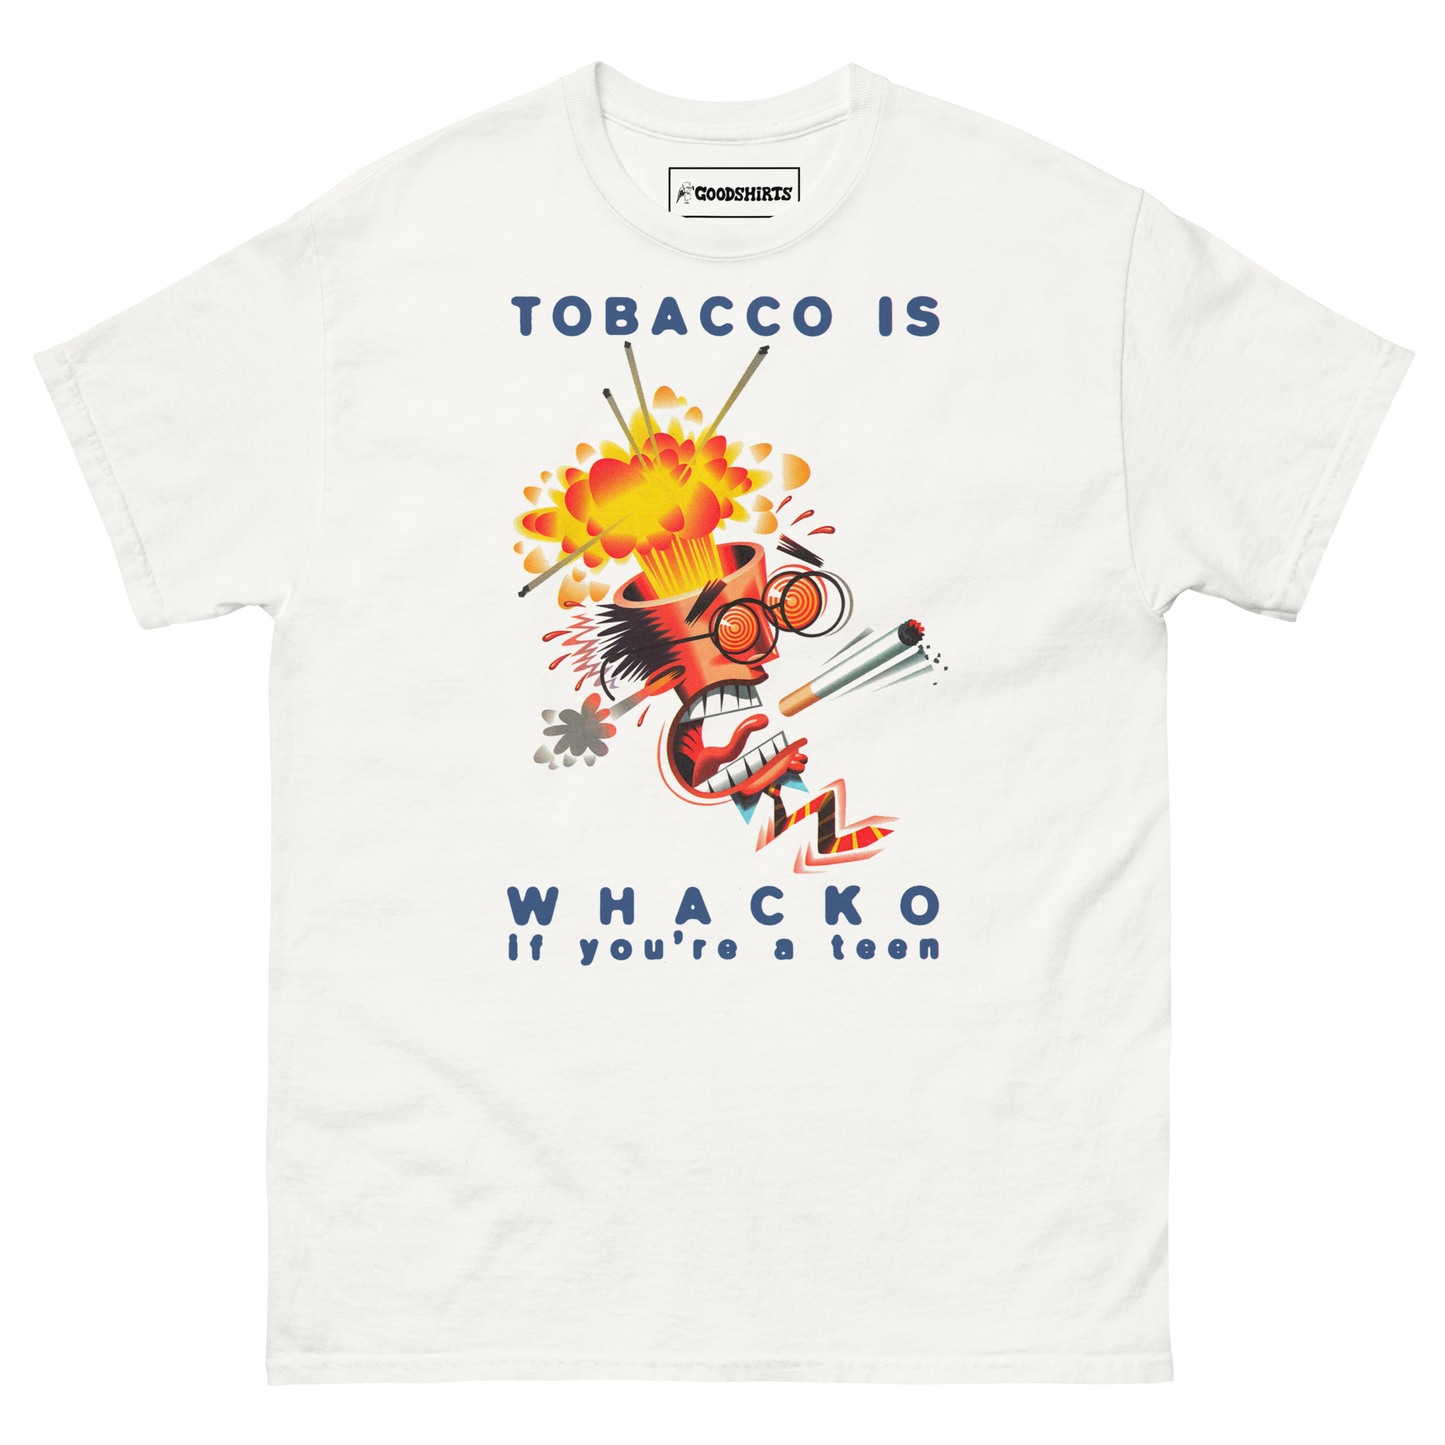 Tobacco Is Whacko If You're A Teen.